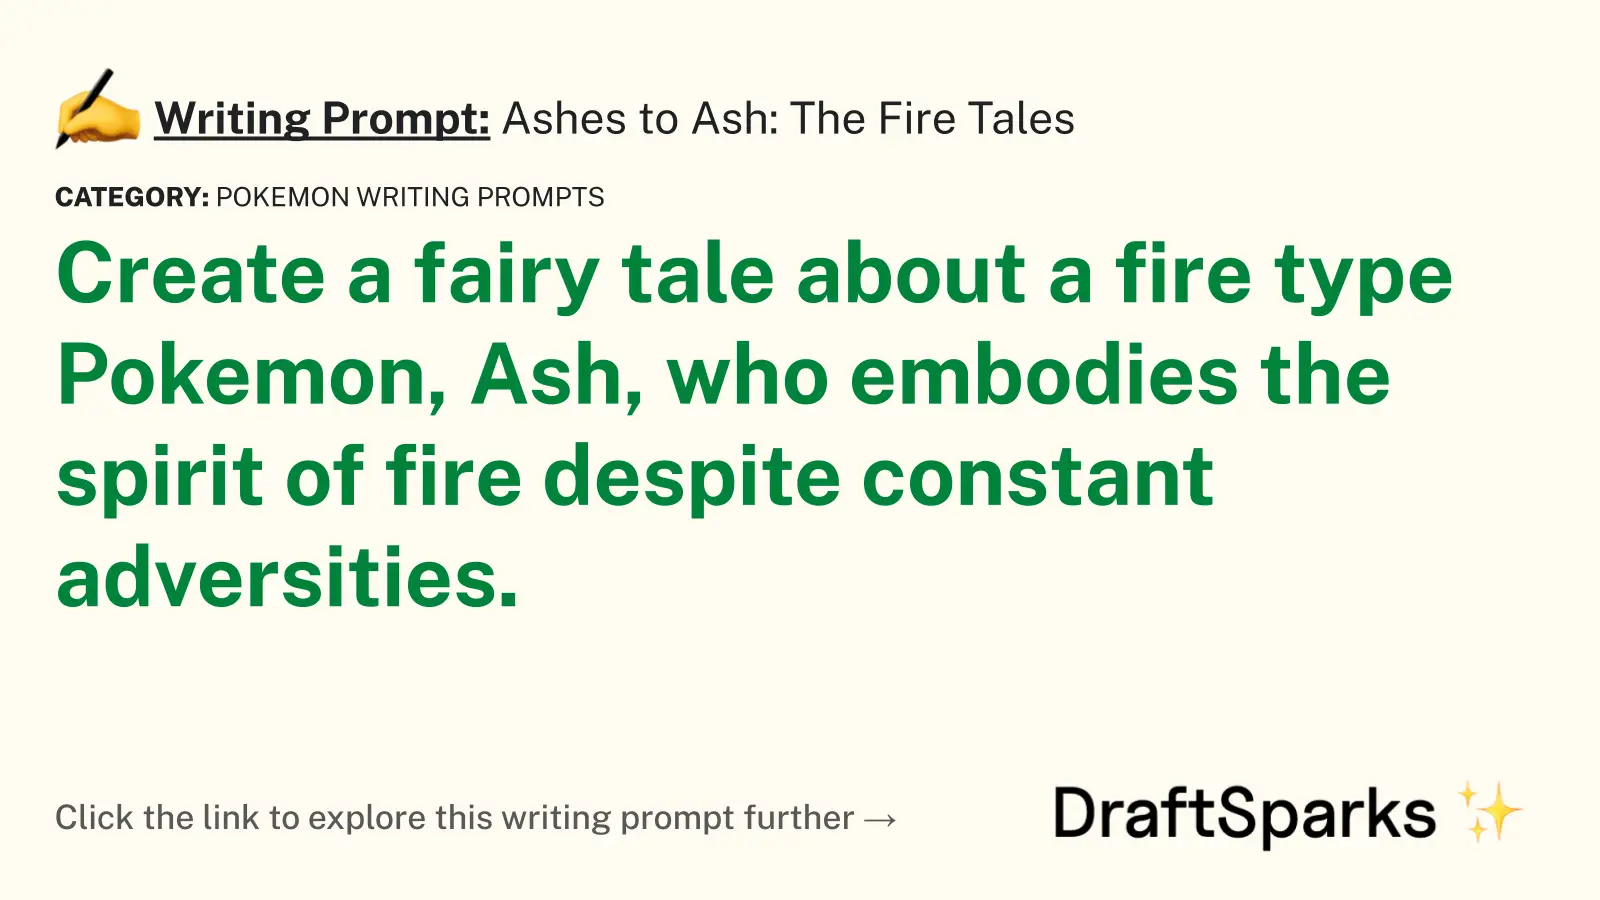 Ashes to Ash: The Fire Tales